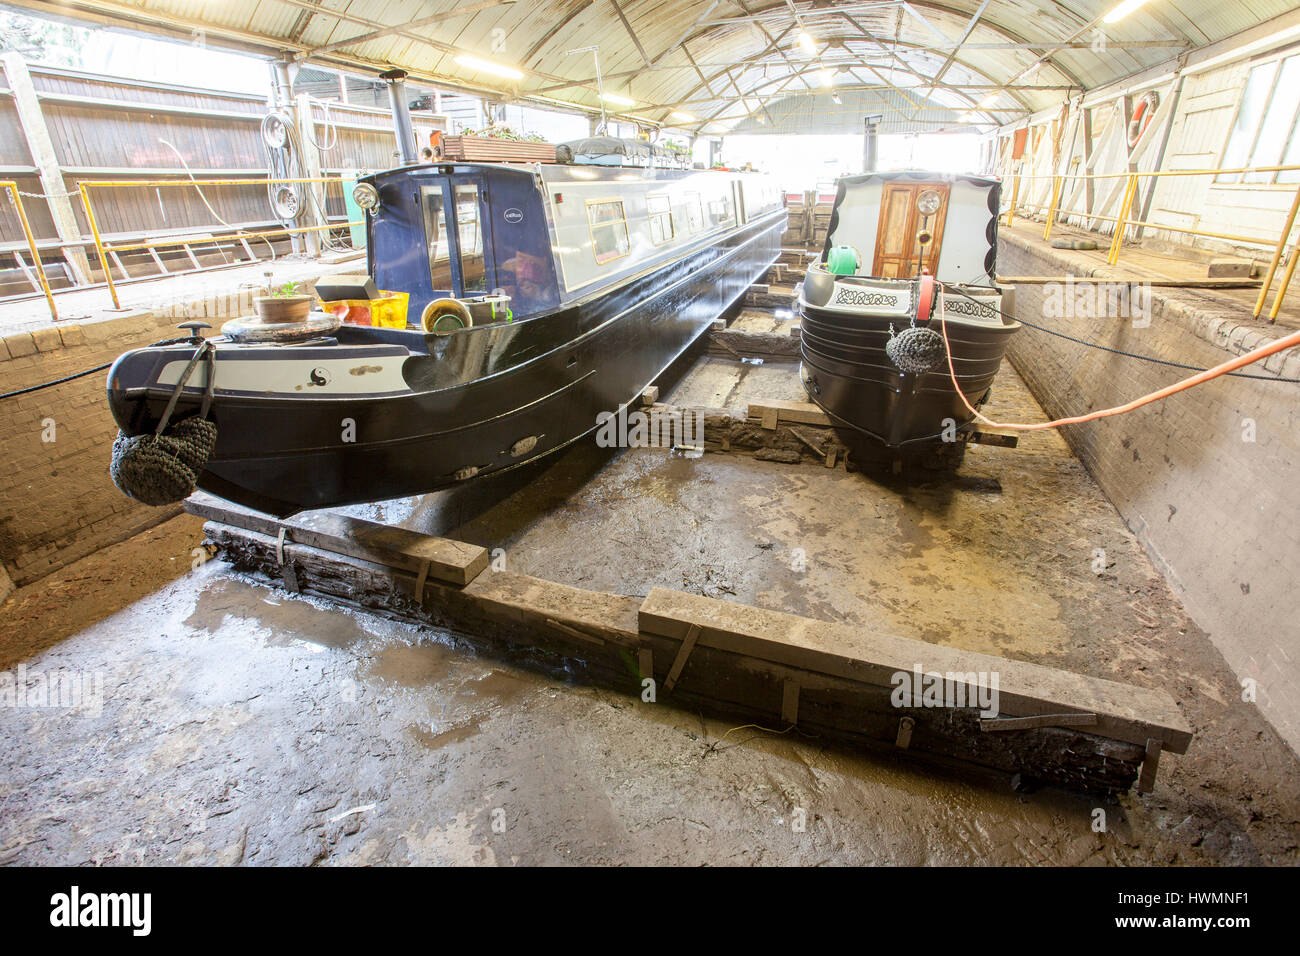 pair of narrowboats in dry dock for blacking Stock Photo